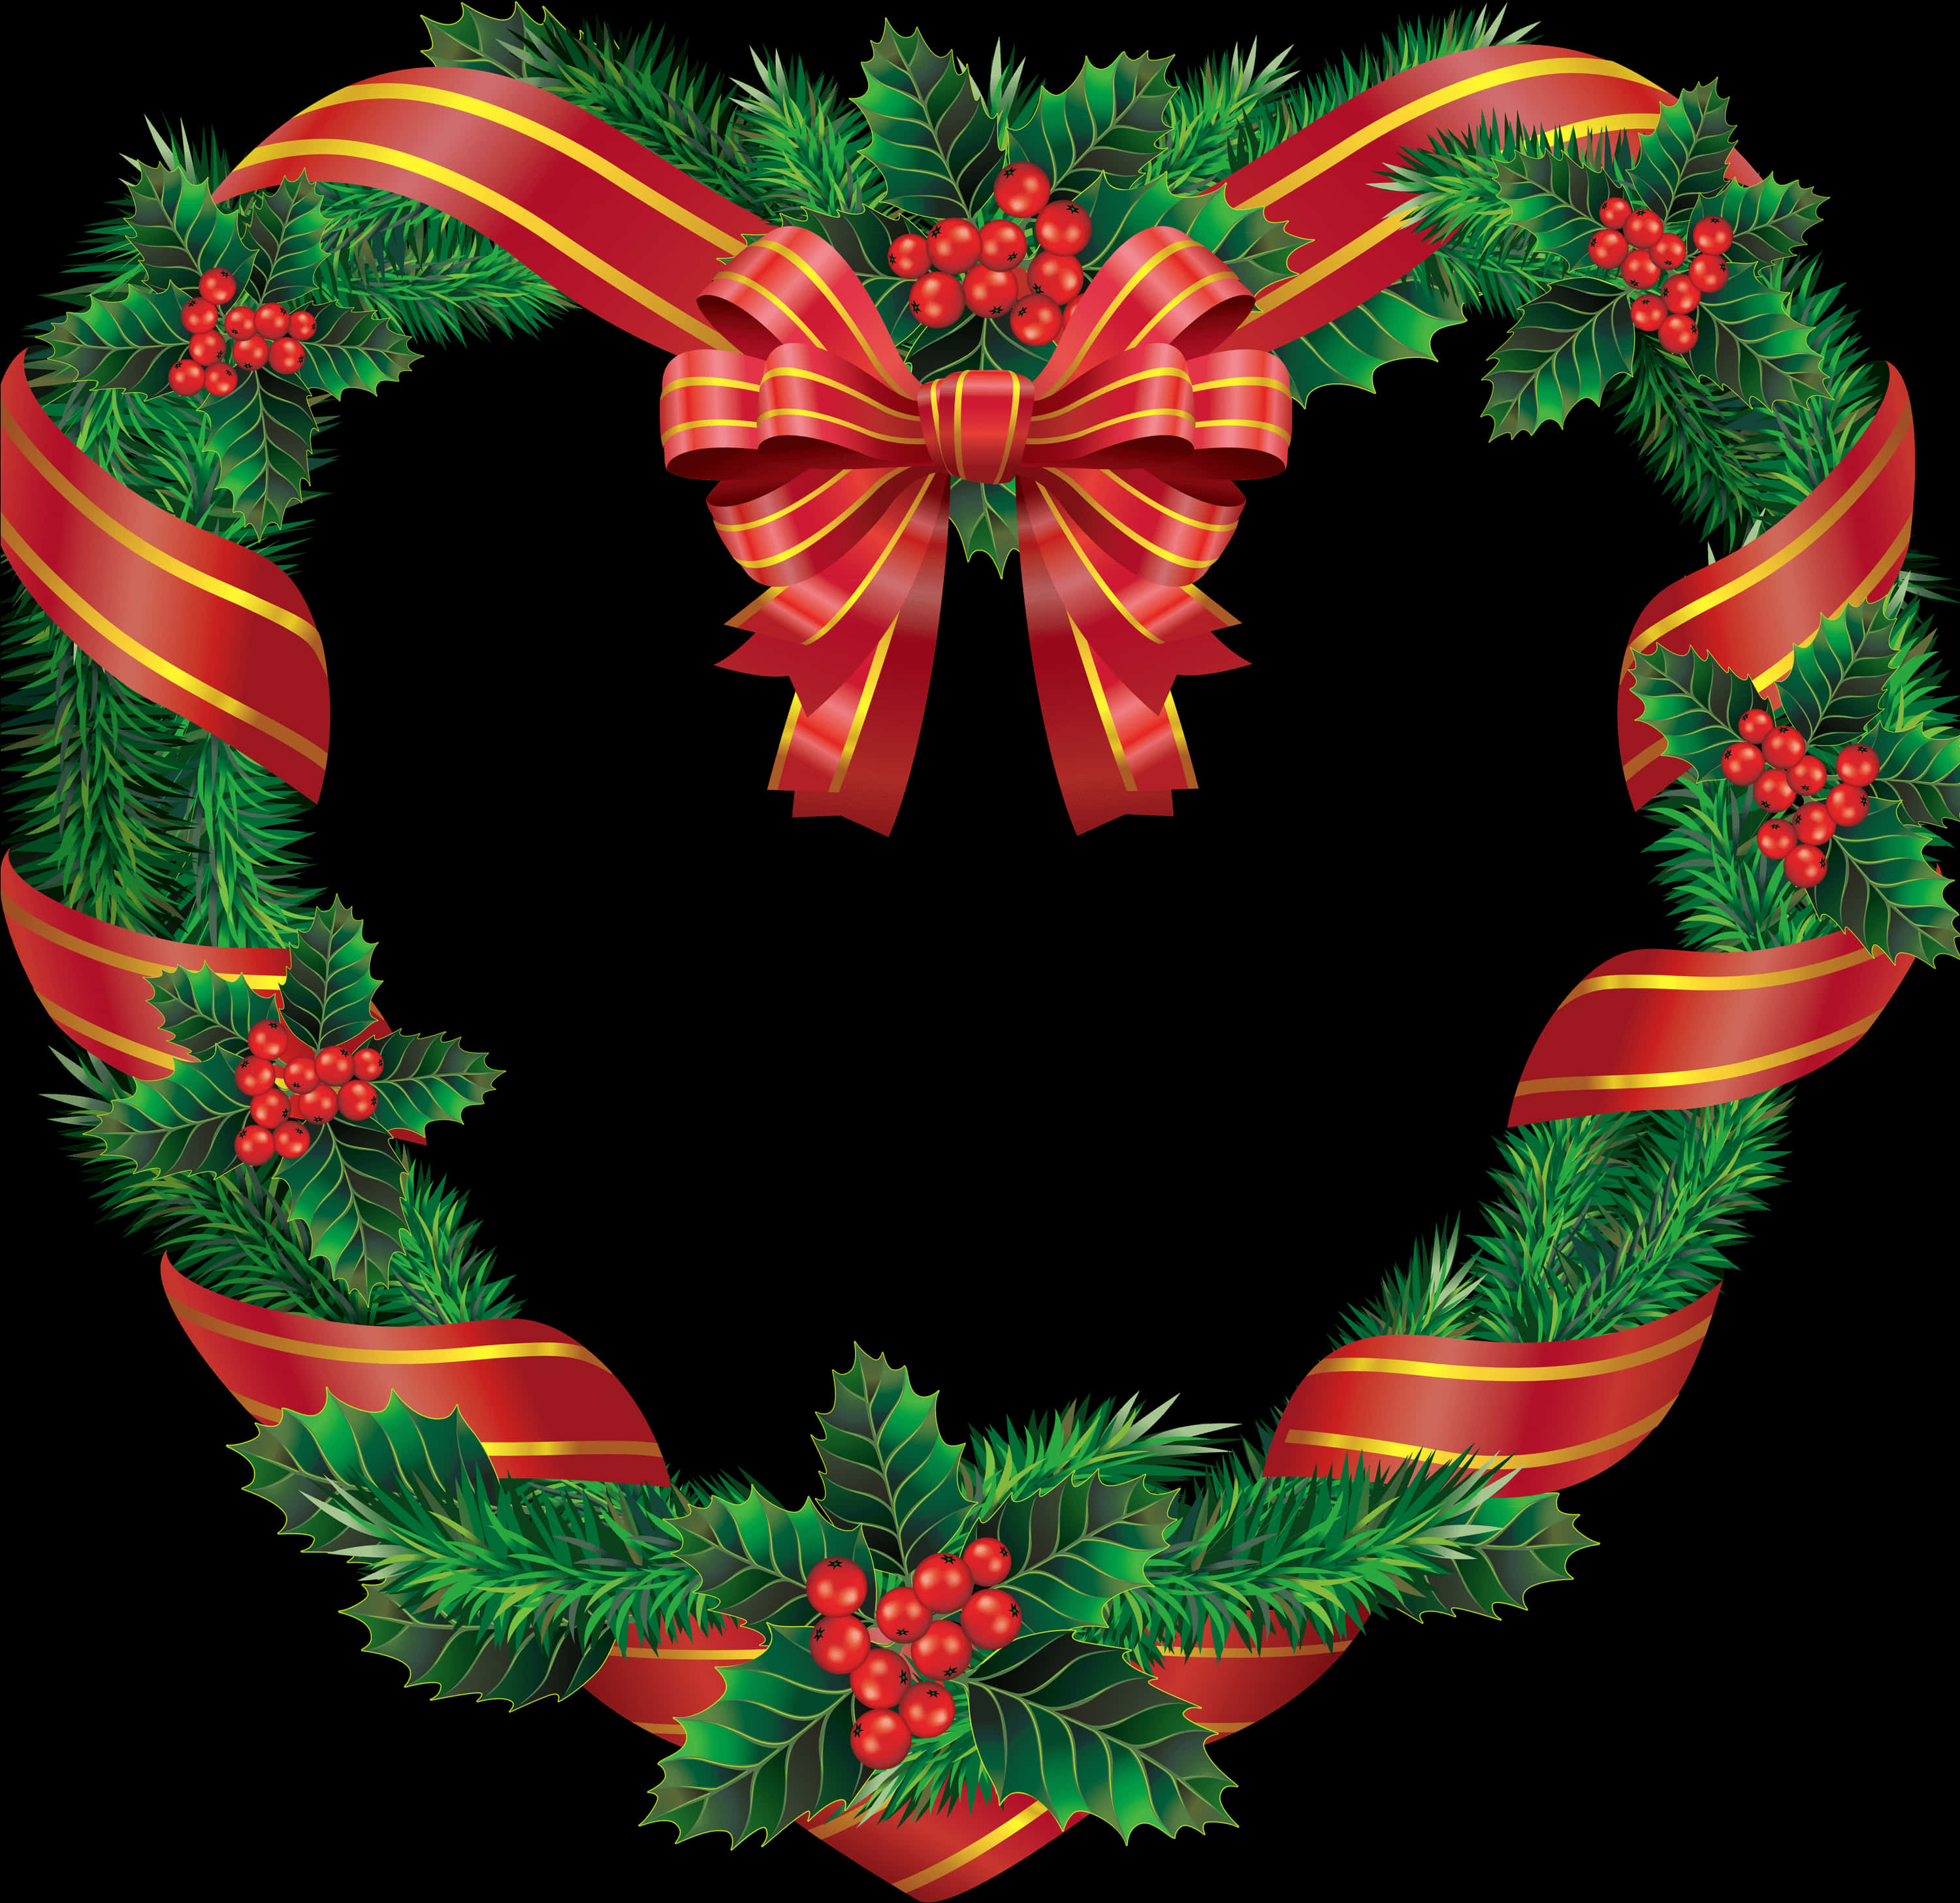 Heart-shaped Christmas Wreath With Ribbon